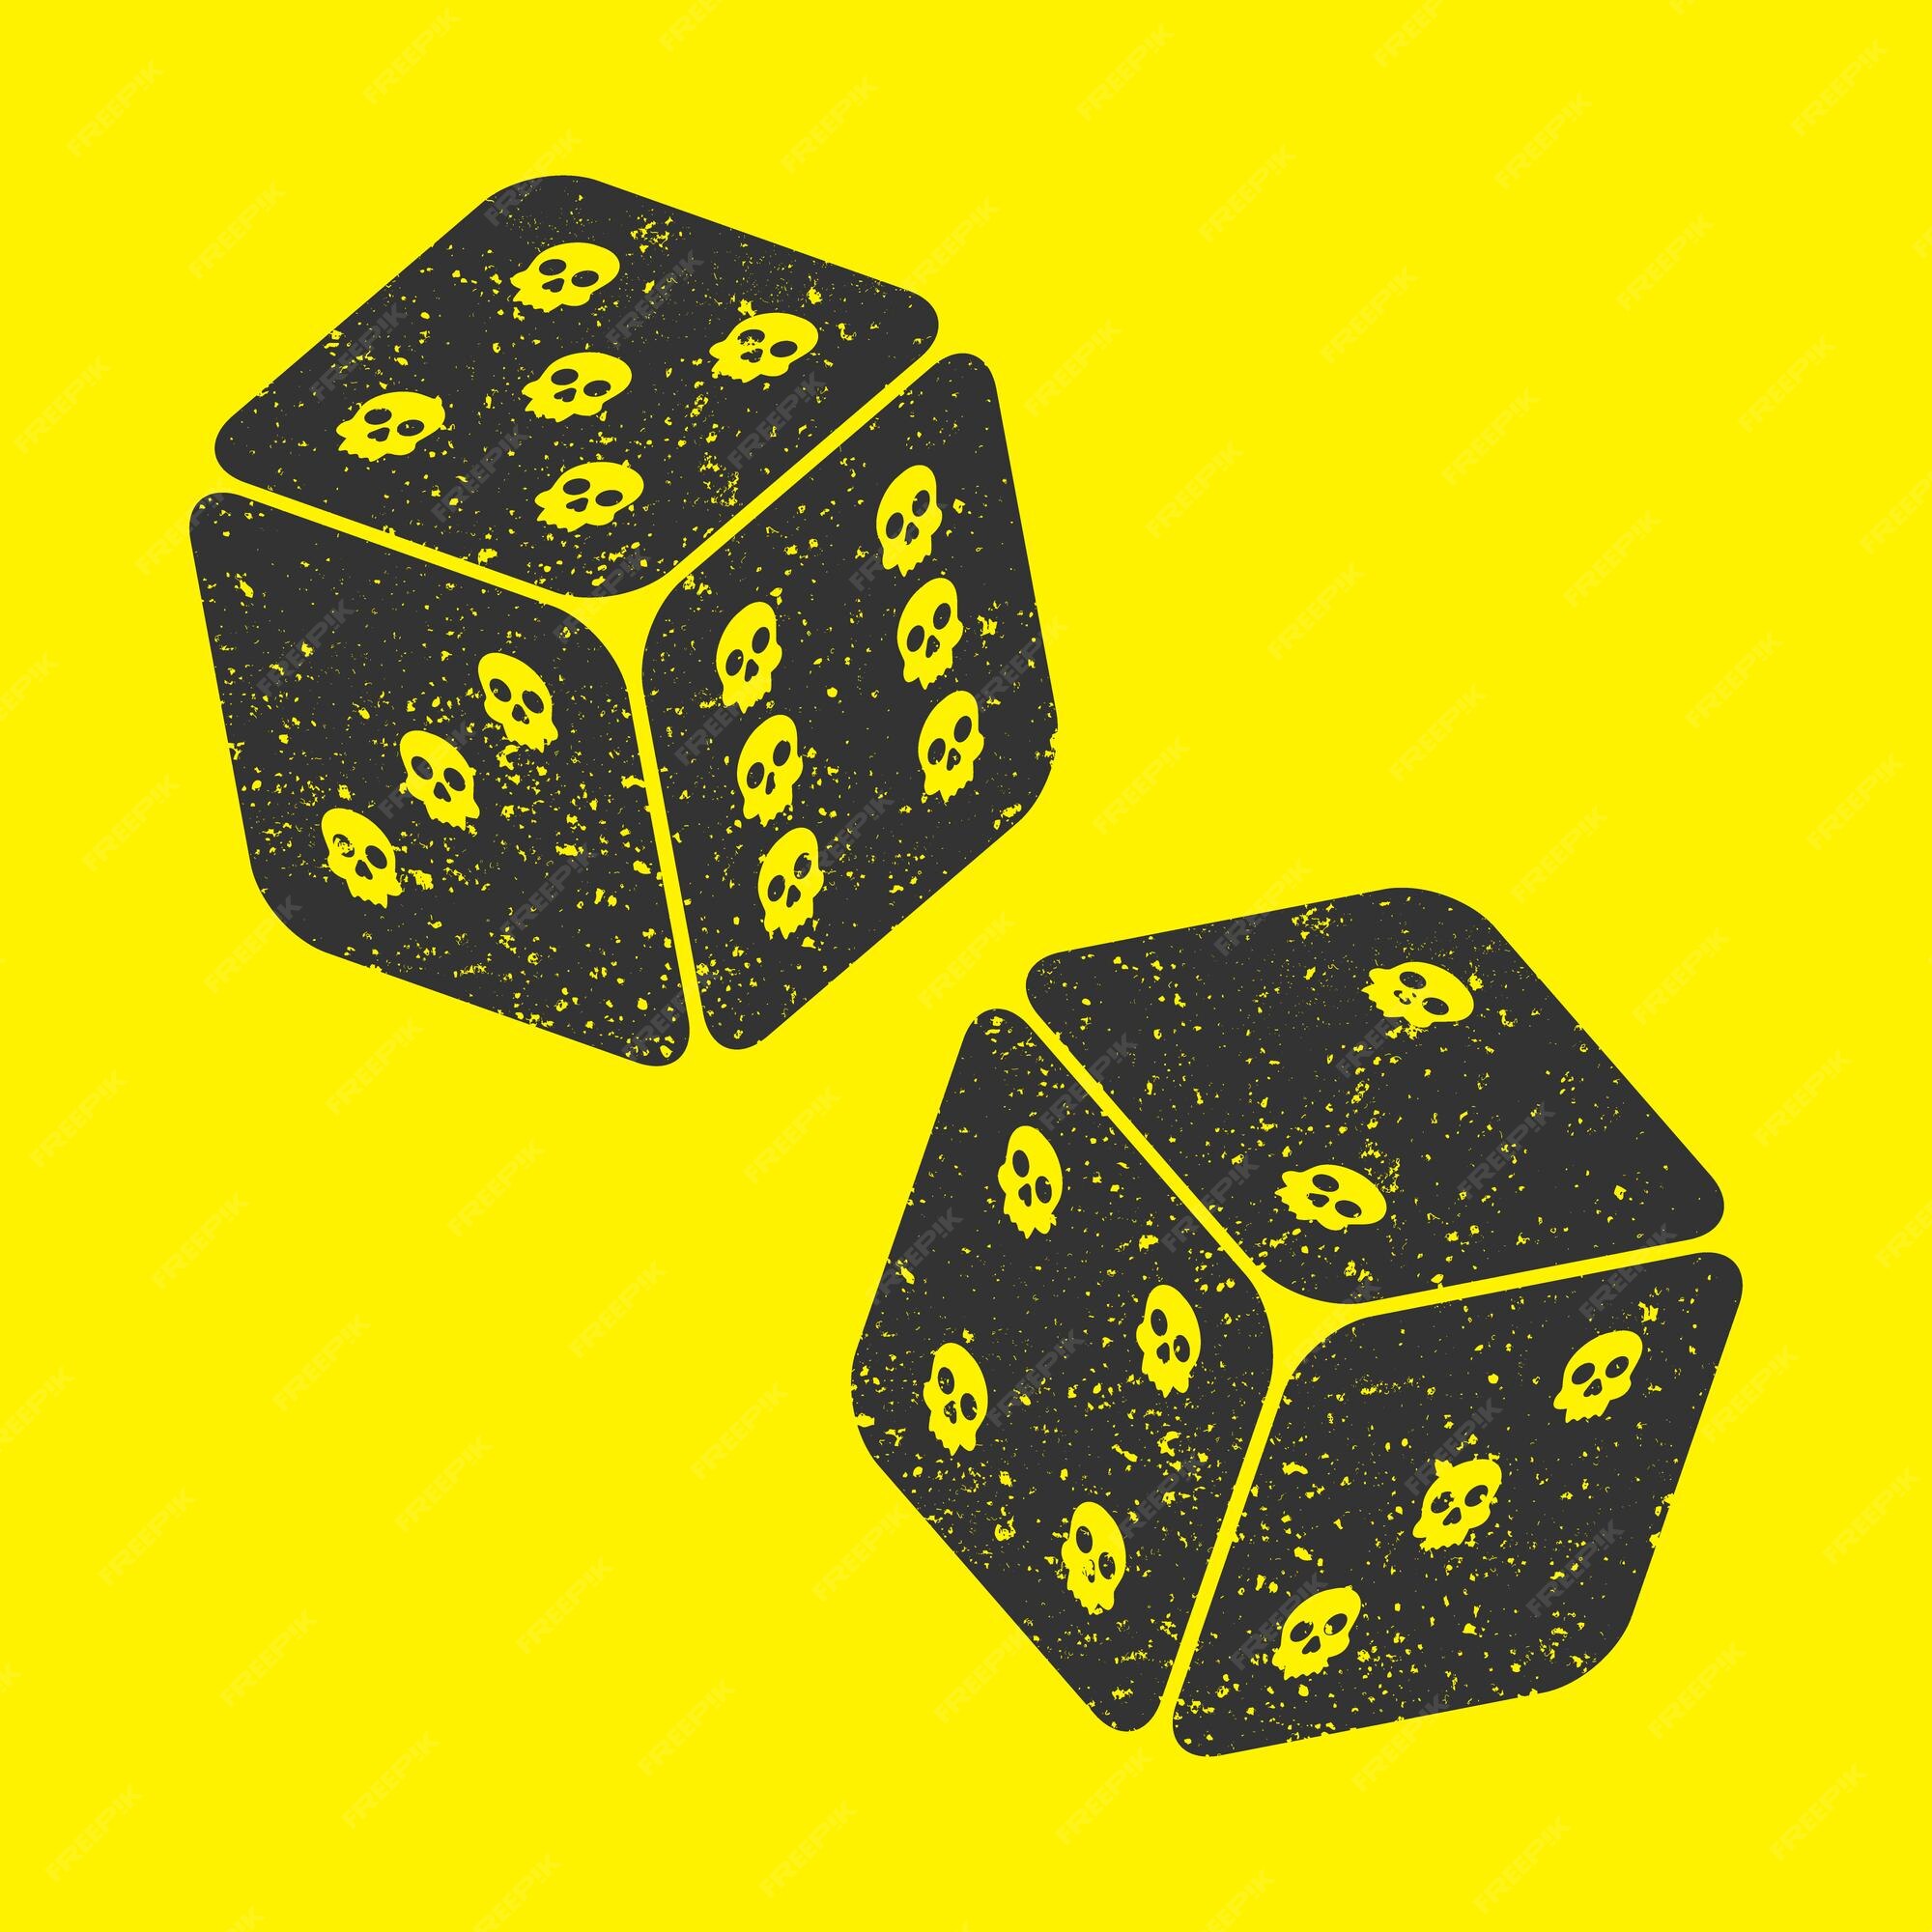 Premium Vector | Ludo dice marked with skulls grunge texture isolated on a  yellow background flat vector illustration